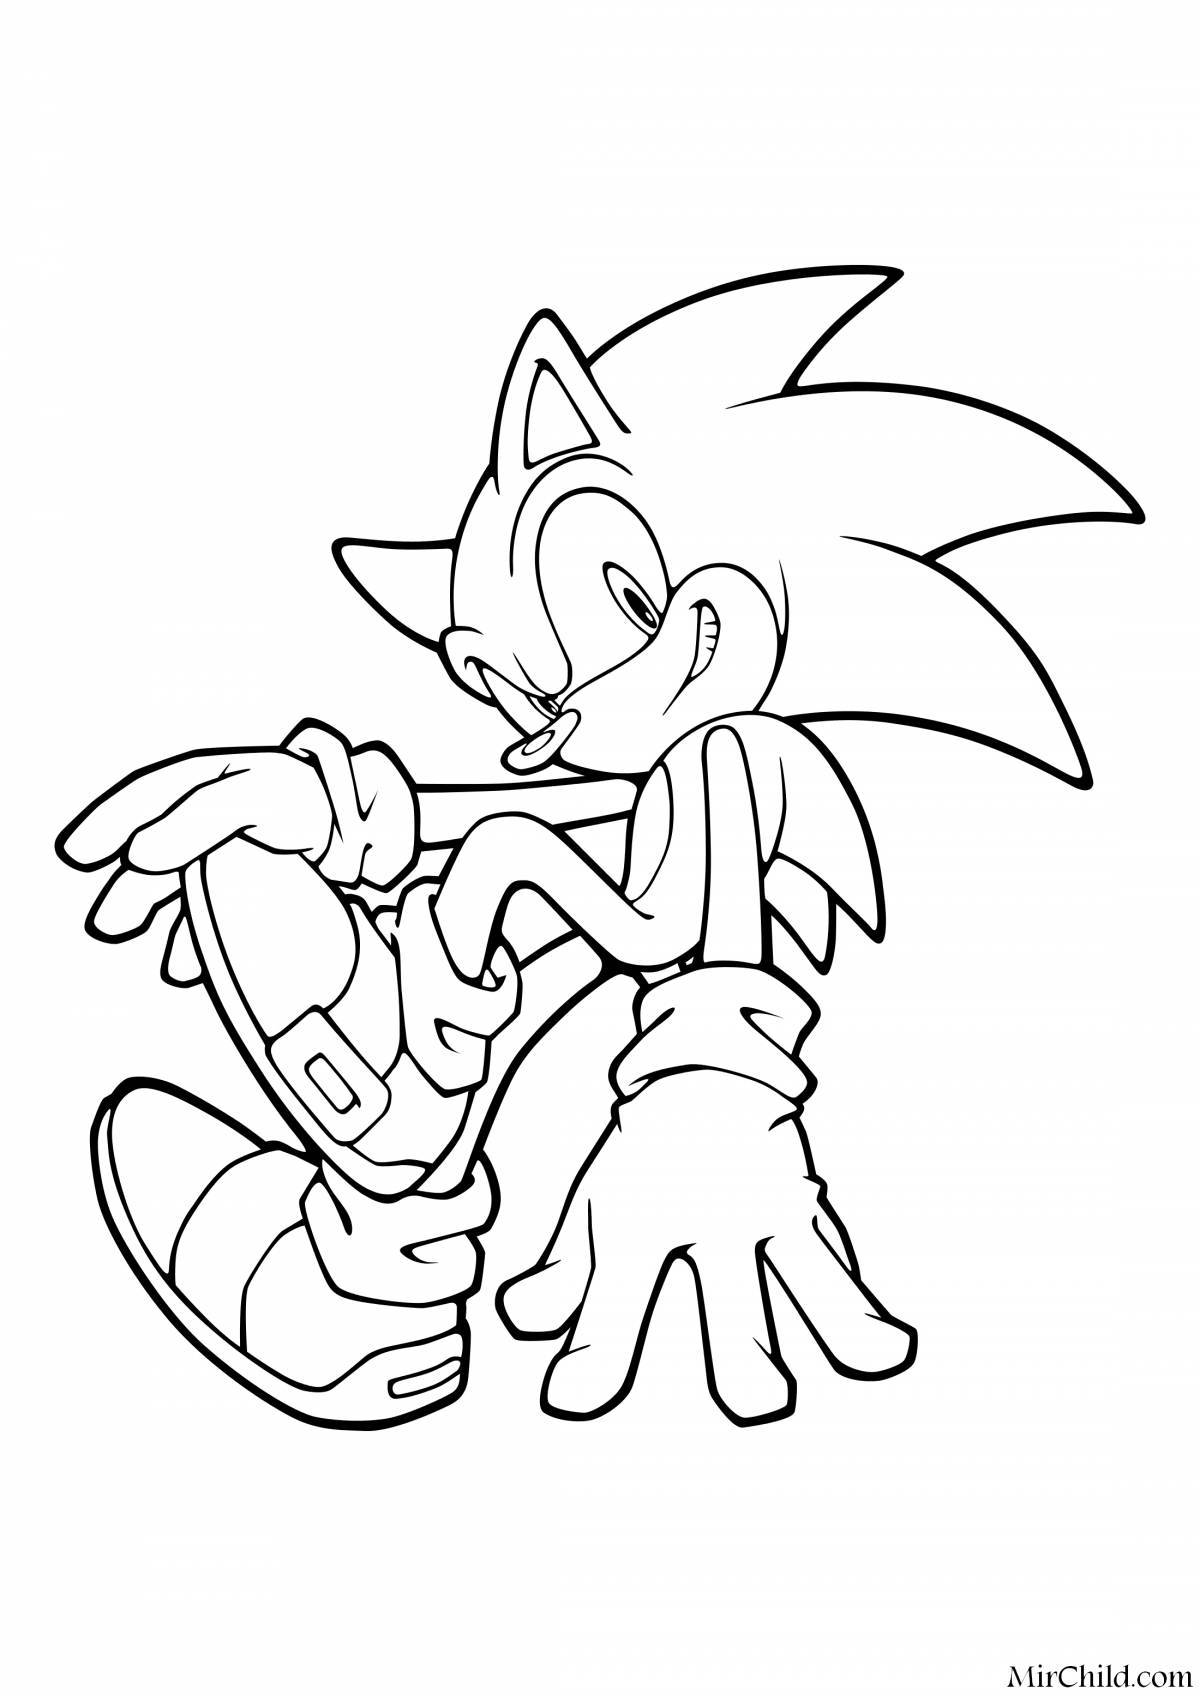 Sonic.exe live coloring